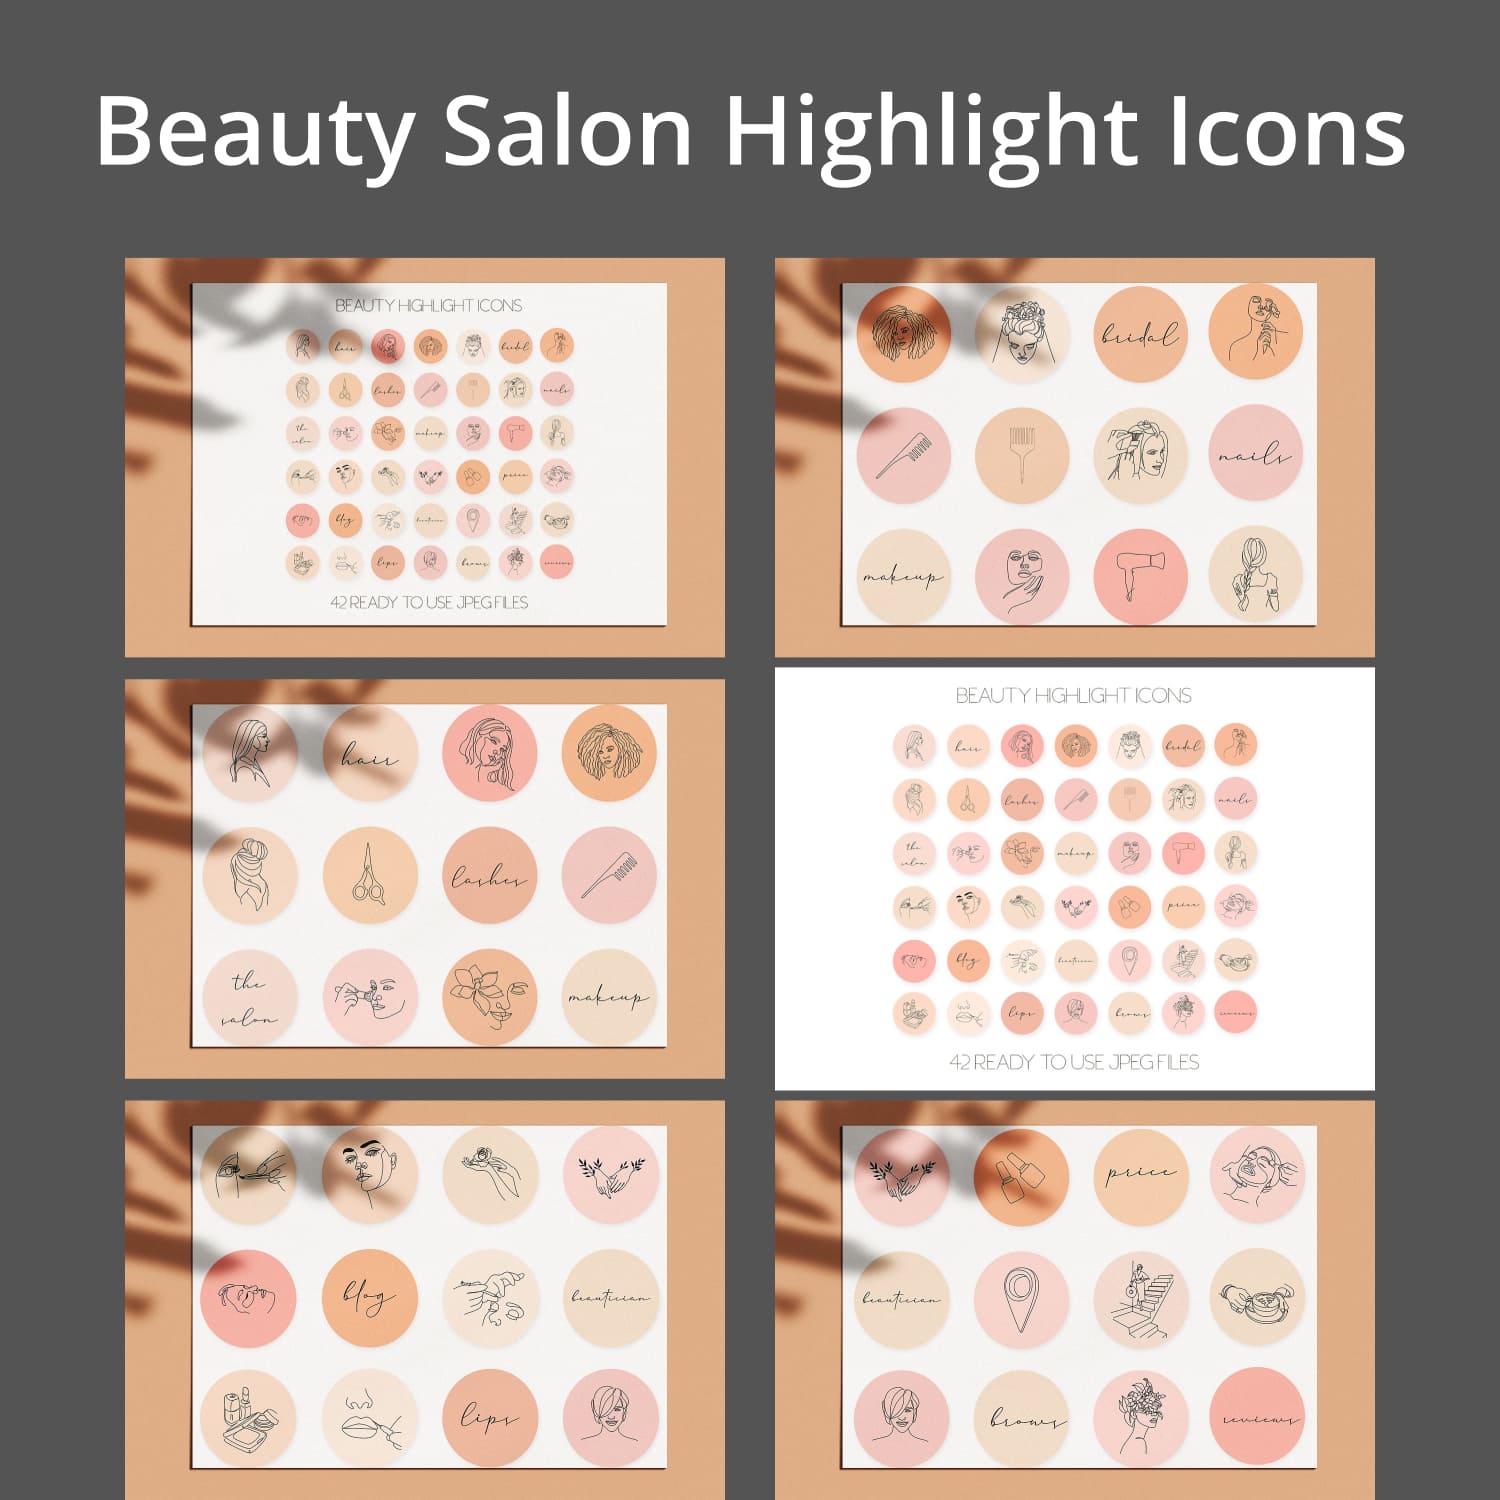 Beauty Salon Highlight Icons - main image preview.